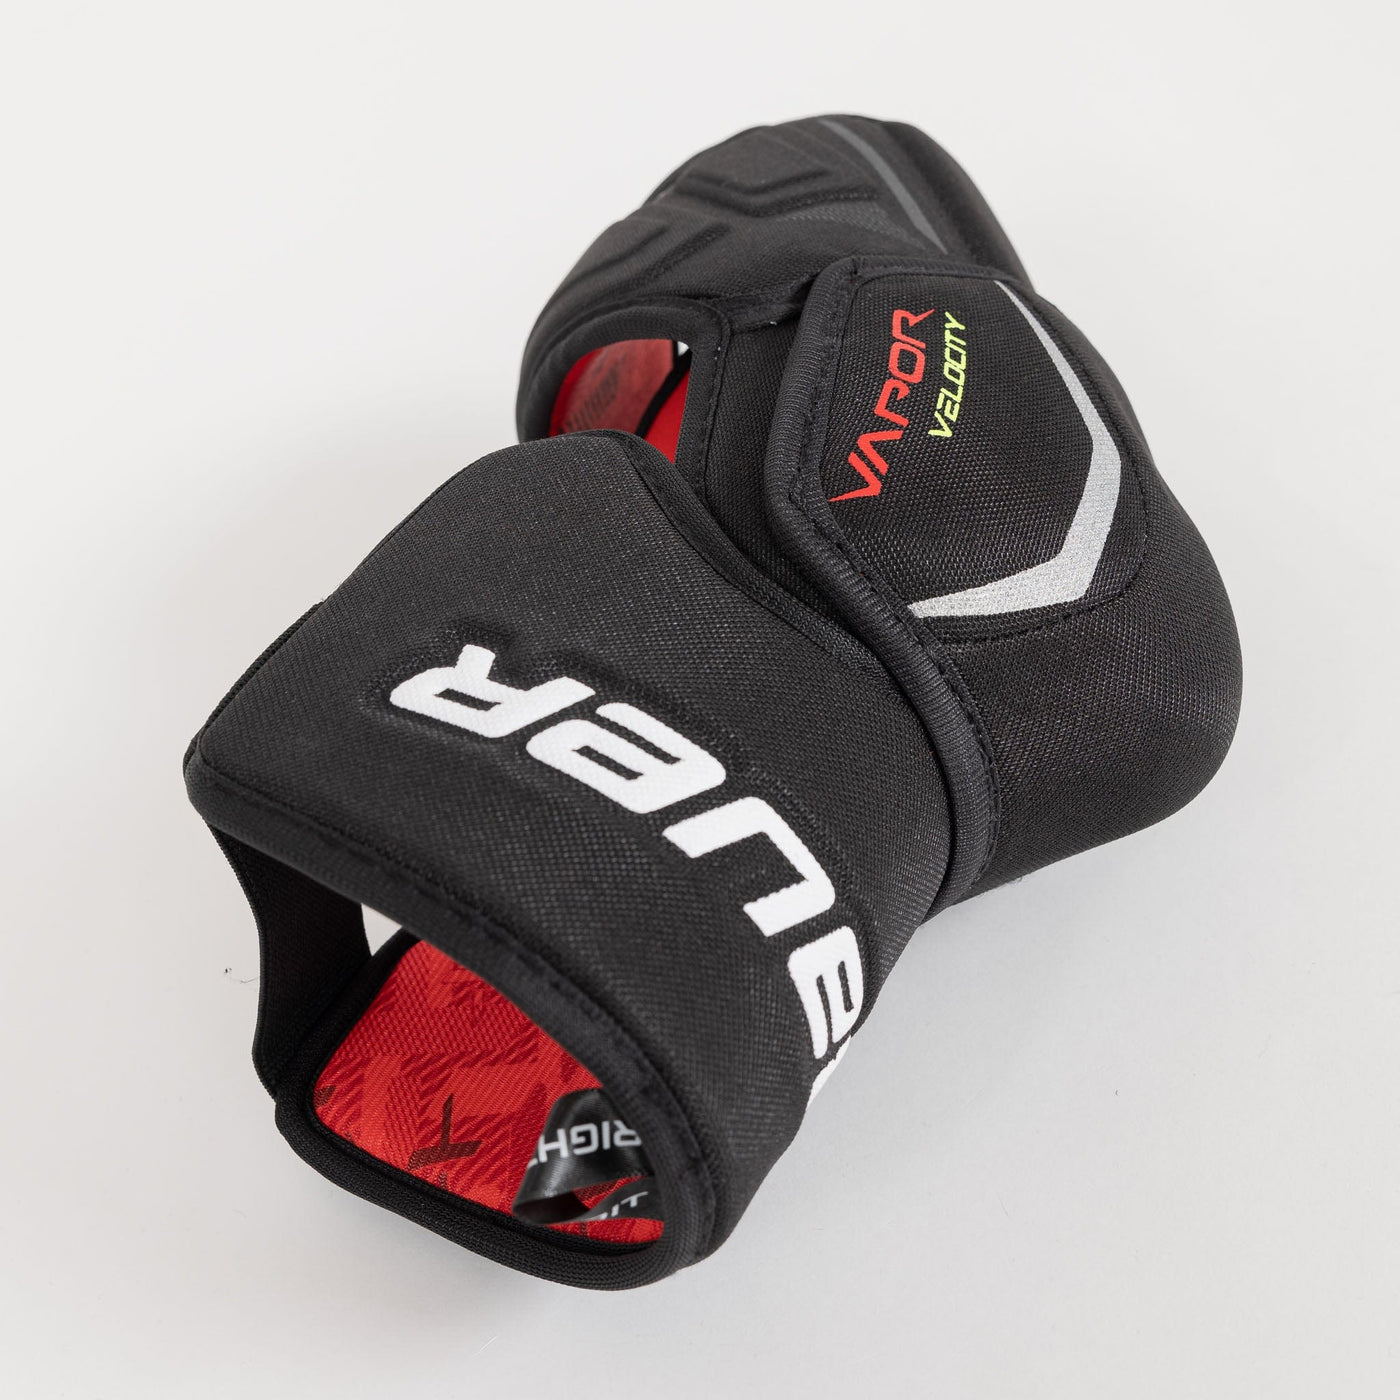 Bauer Vapor Velocity Youth Hockey Elbow Pads - The Hockey Shop Source For Sports